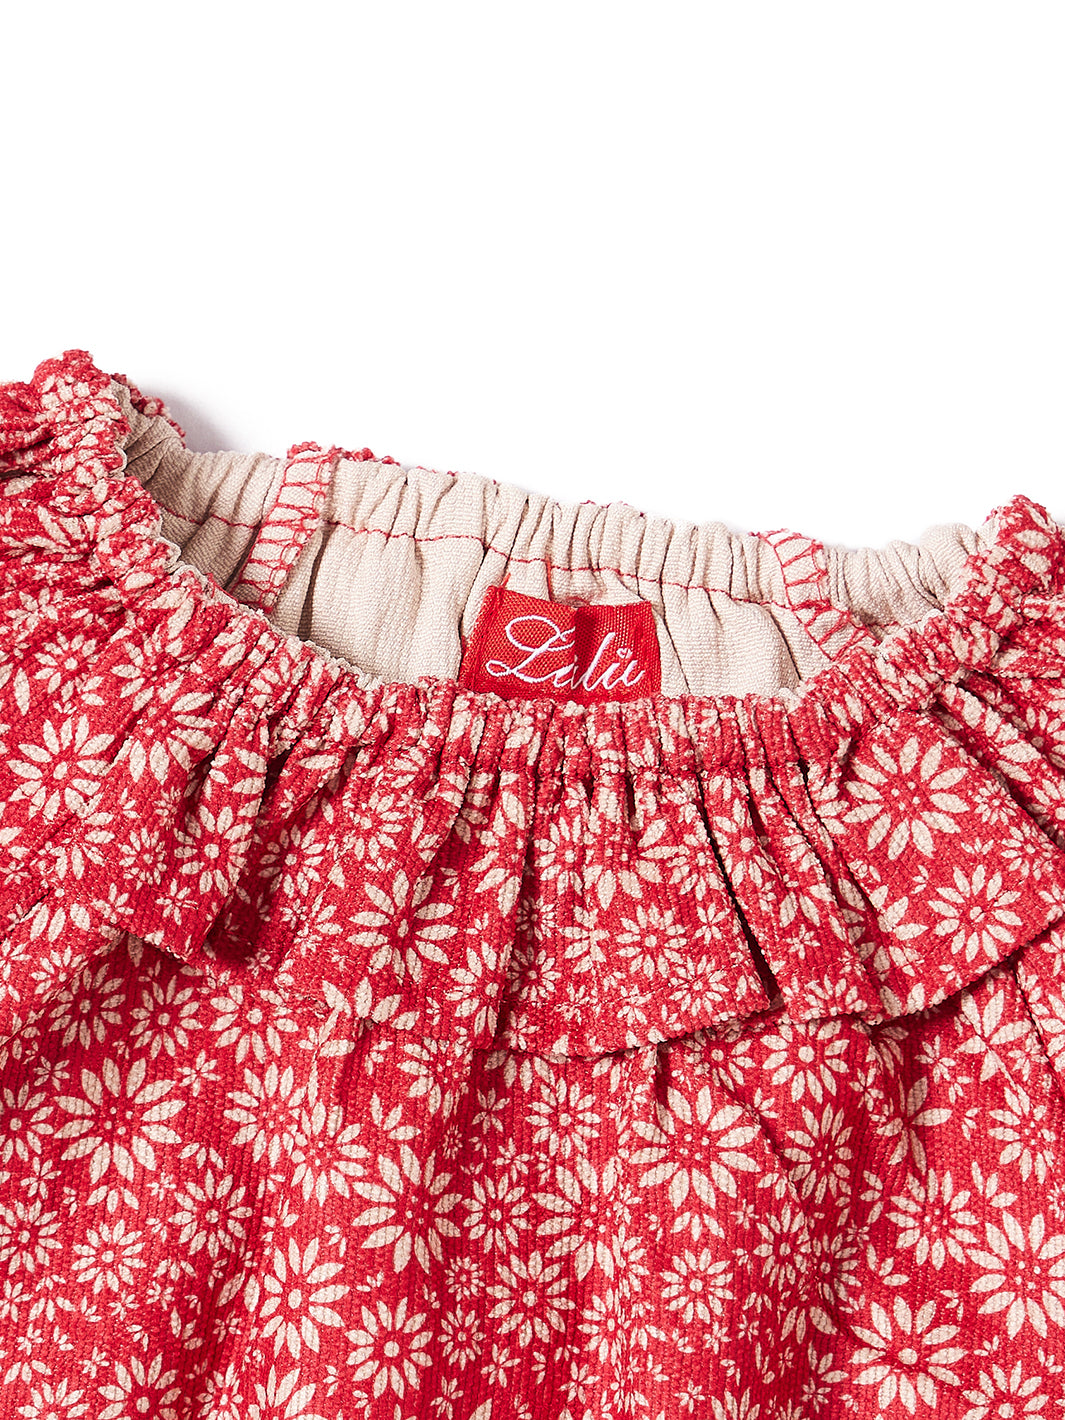 Daisy Floral Corduroy Shirt - Red